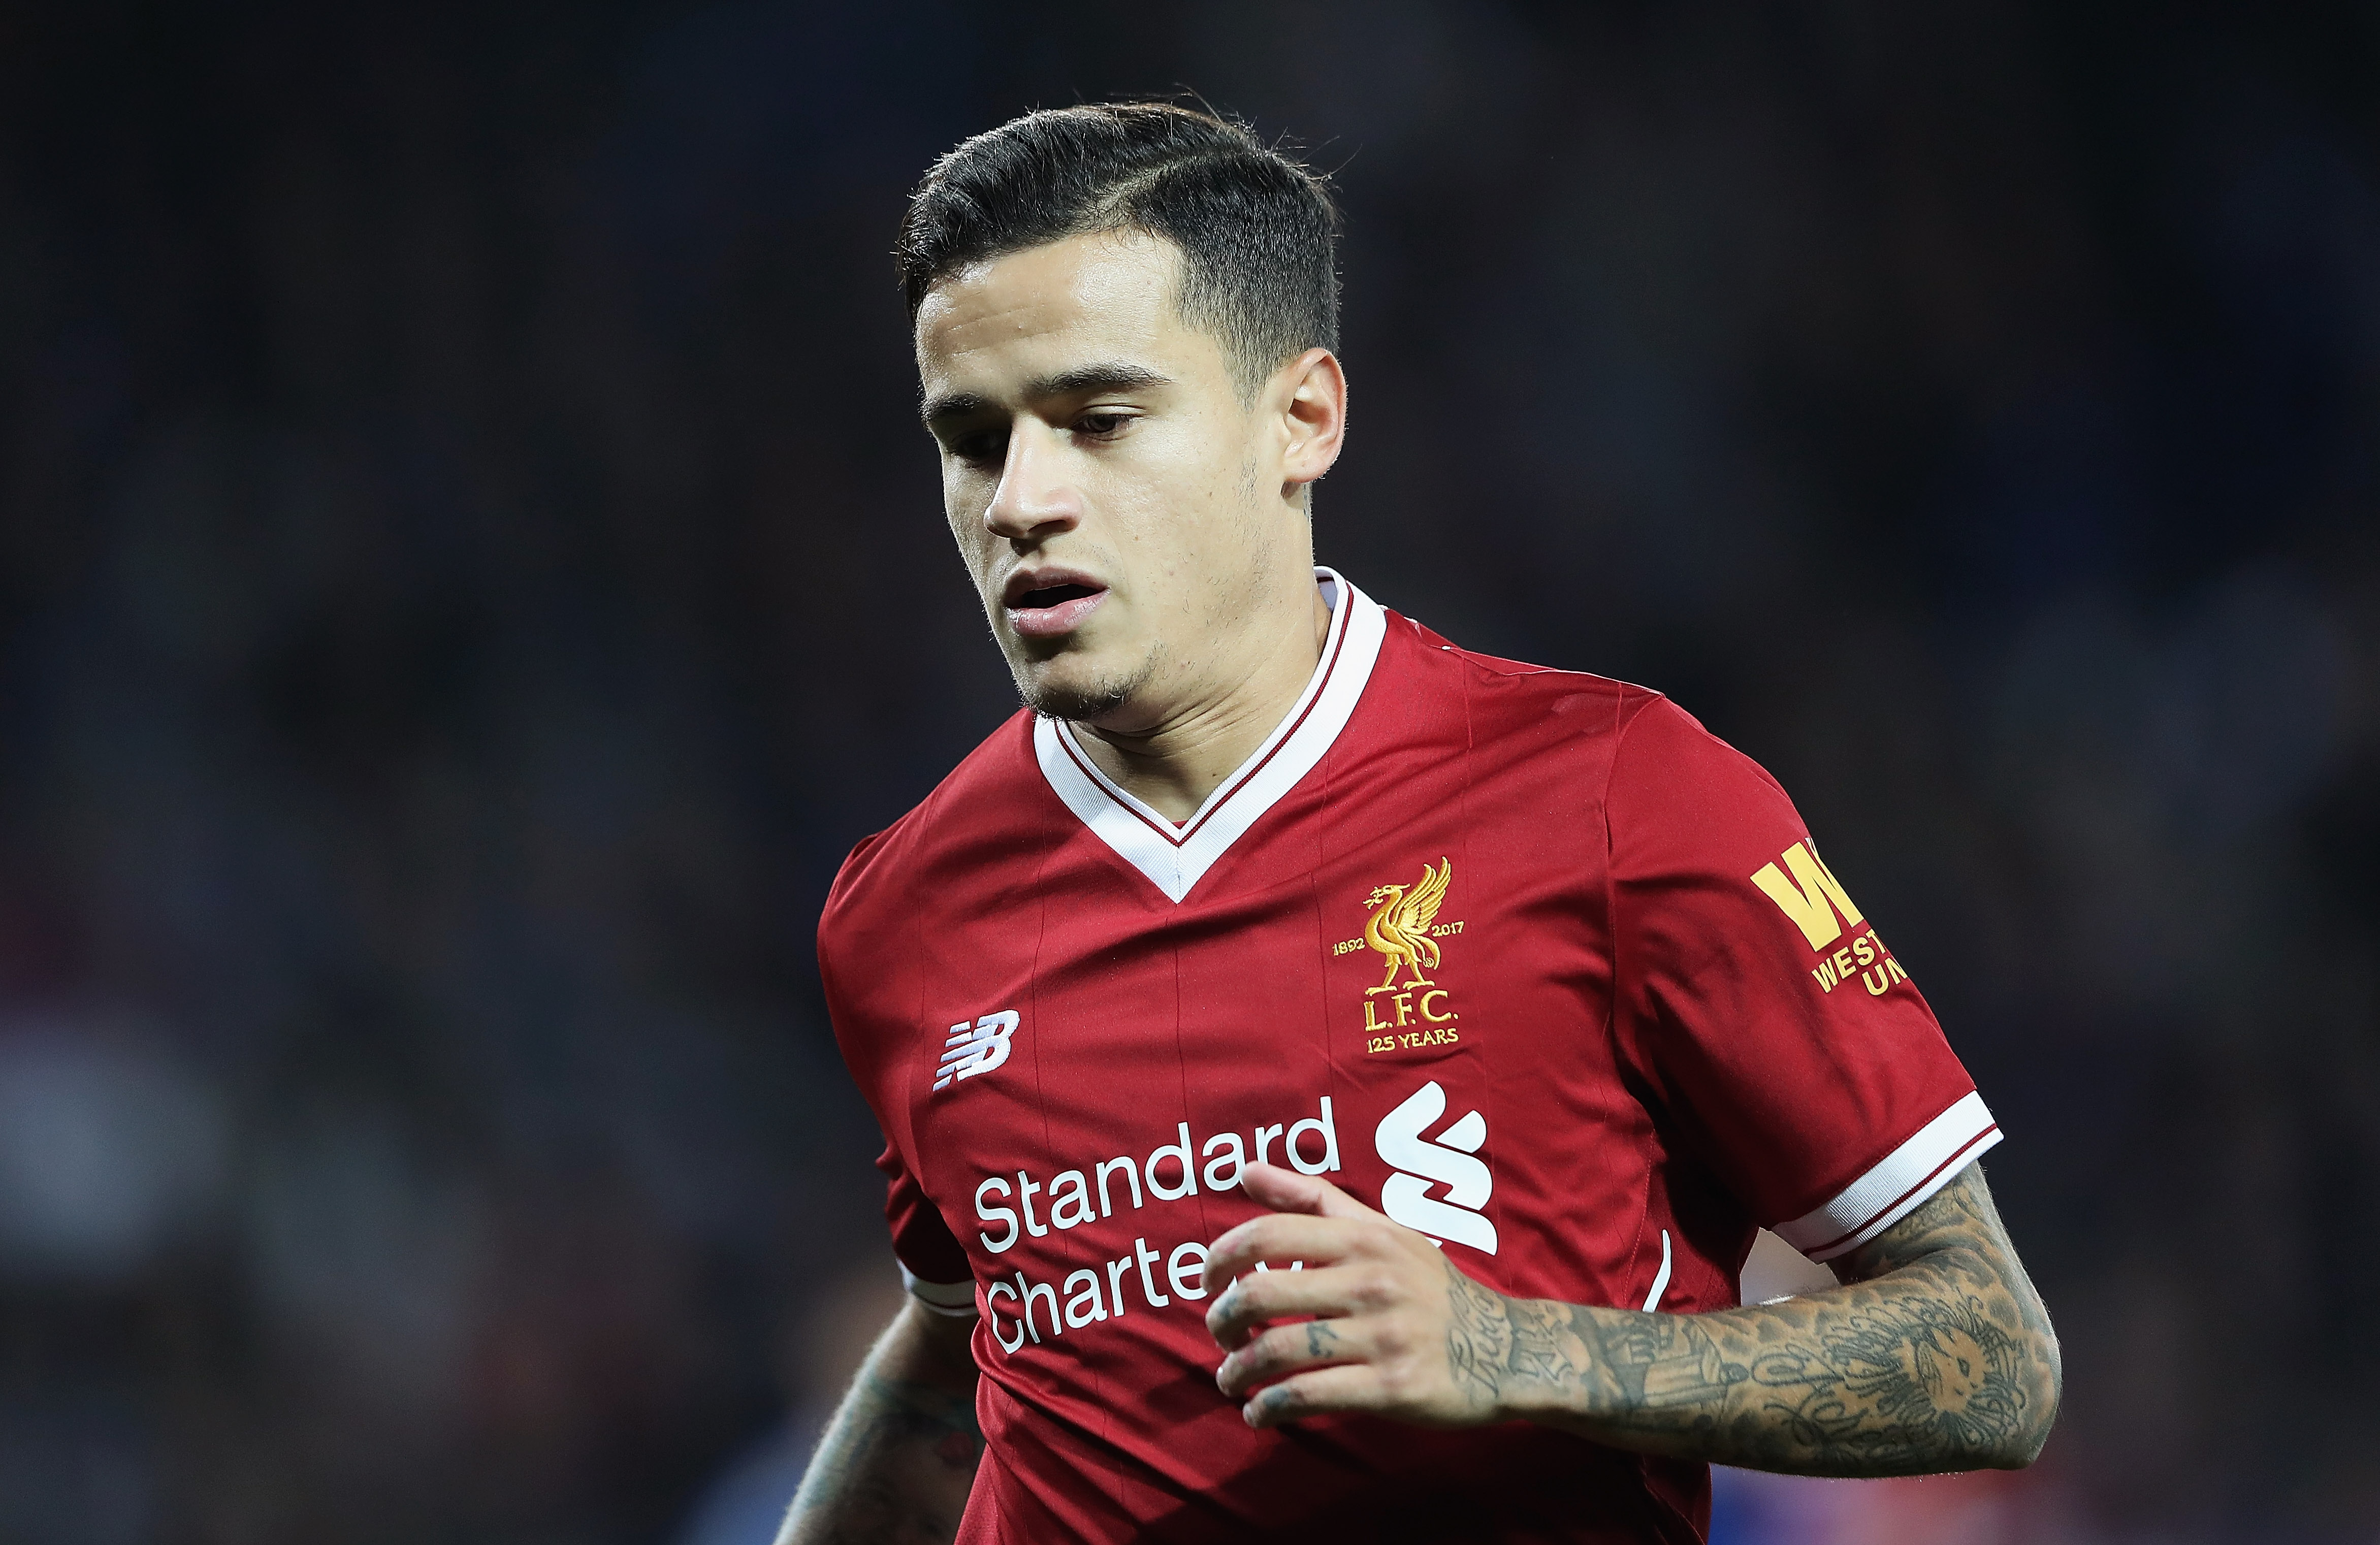 LEICESTER, ENGLAND - SEPTEMBER 19:  Philippe Coutinho of Liverpool in action  during the Carabao Cup Third Round match between Leicester City and Liverpool at The King Power Stadium on September 19, 2017 in Leicester, England.  (Photo by Matthew Lewis/Getty Images)